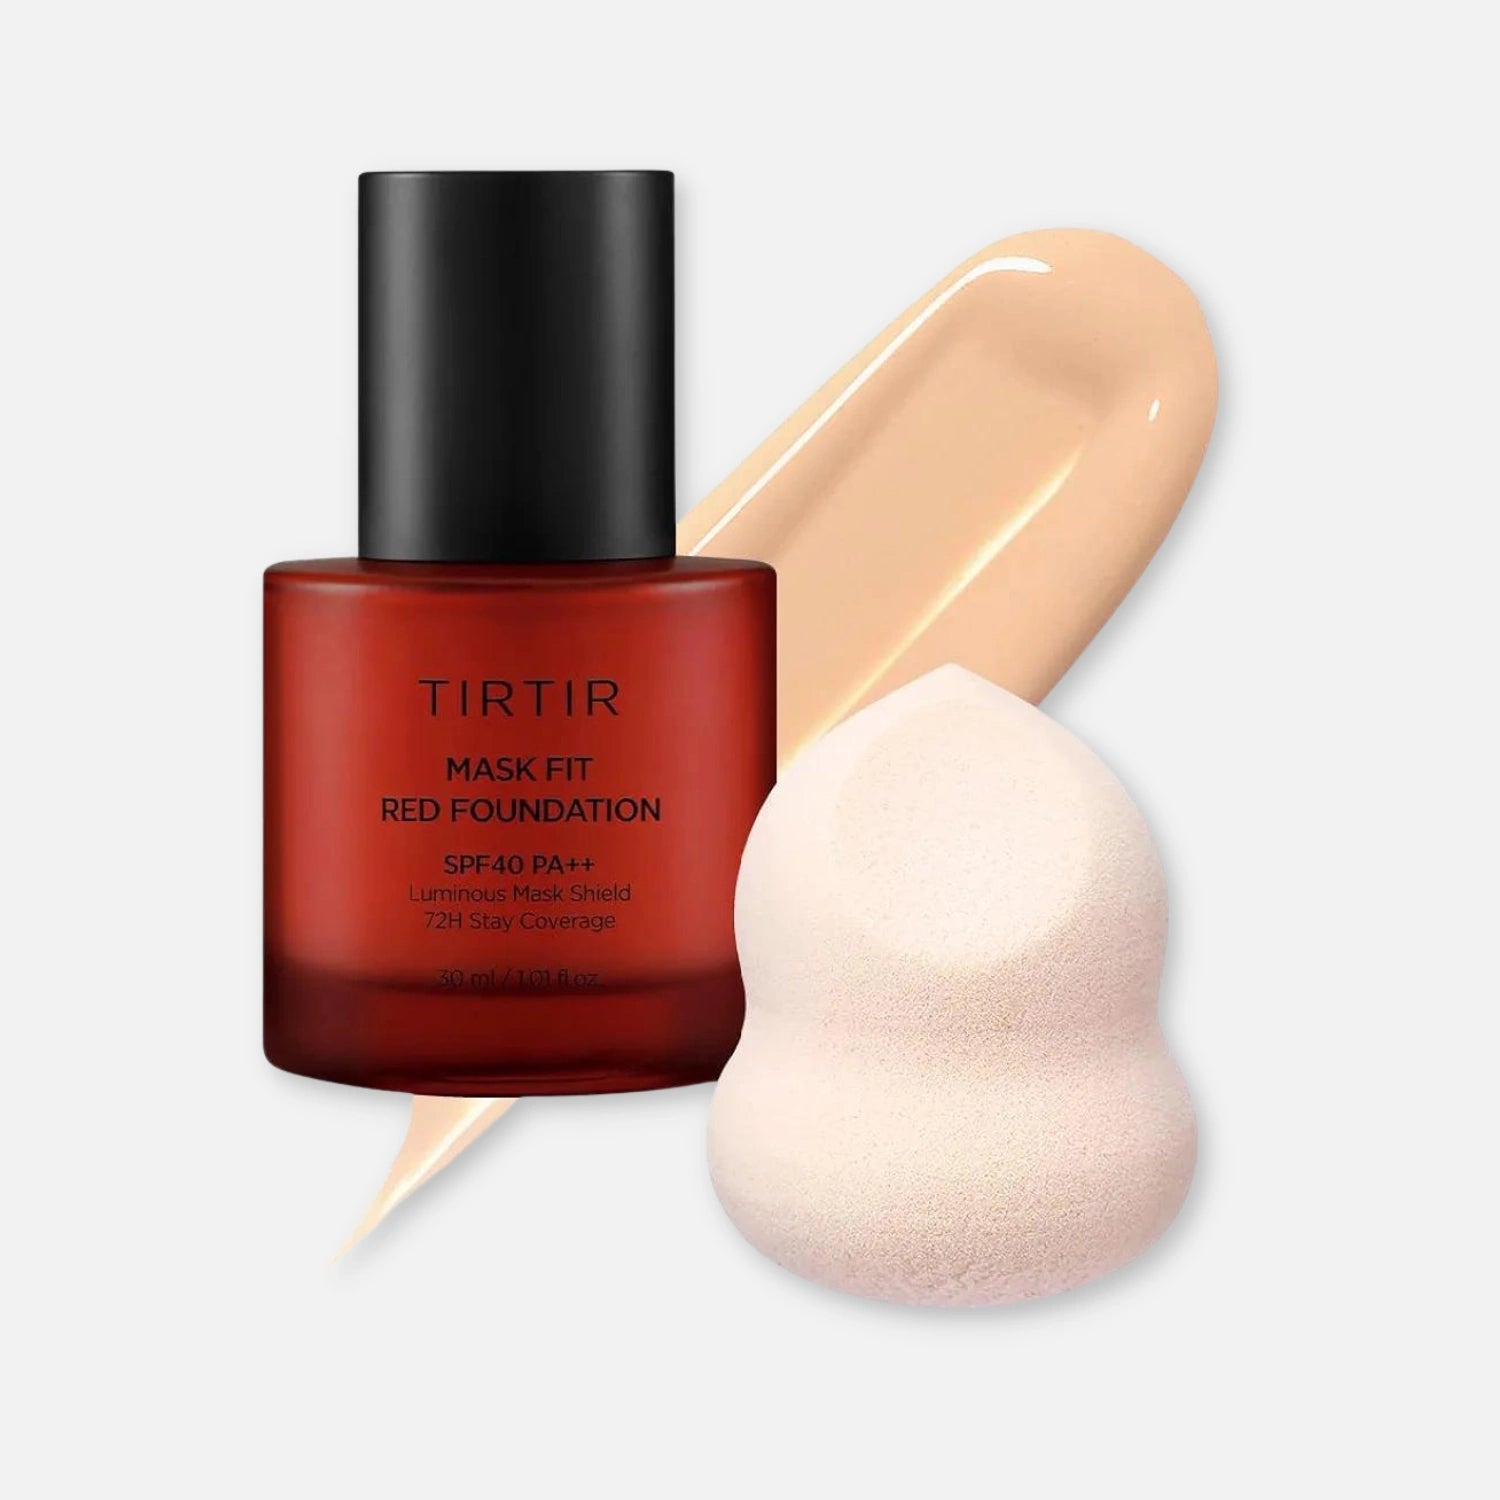 TIRTIR Mask Fit Red Foundation SPF40 PA++ 30ml (Various Shades) - Buy Me Japan